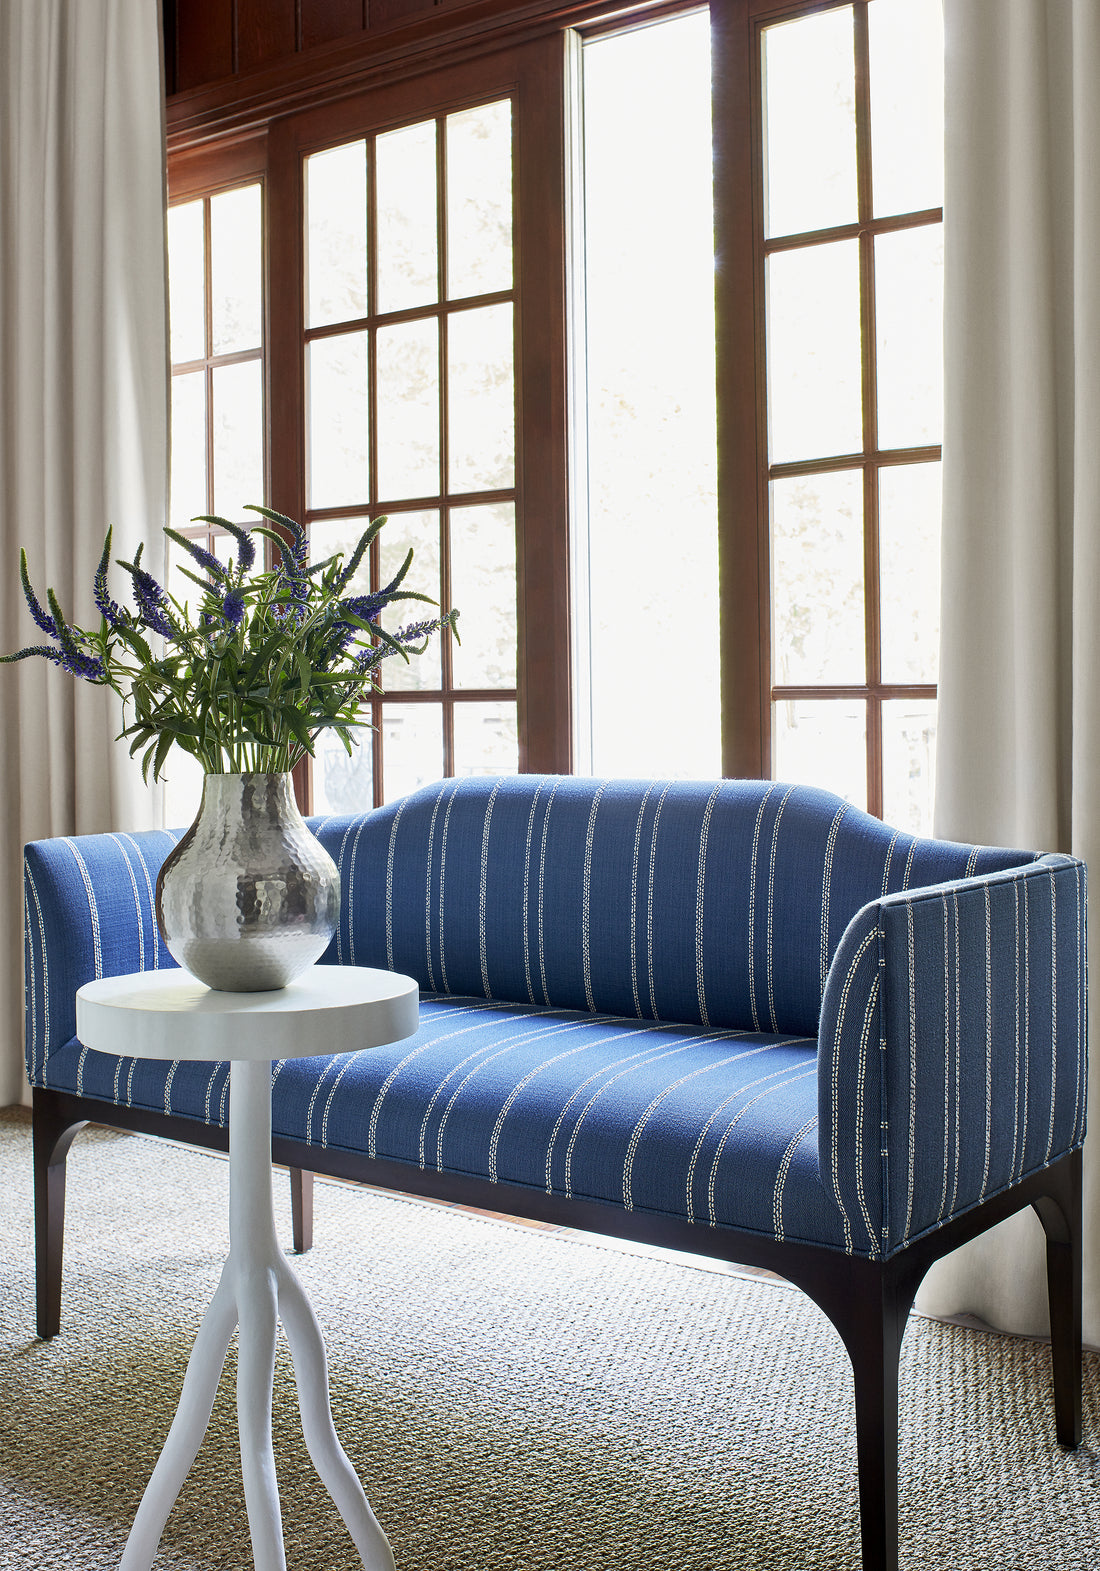 Dorset Bench in Nolan Stripe woven fabric in blue color - pattern number W73309 by Thibaut in the Nomad collection